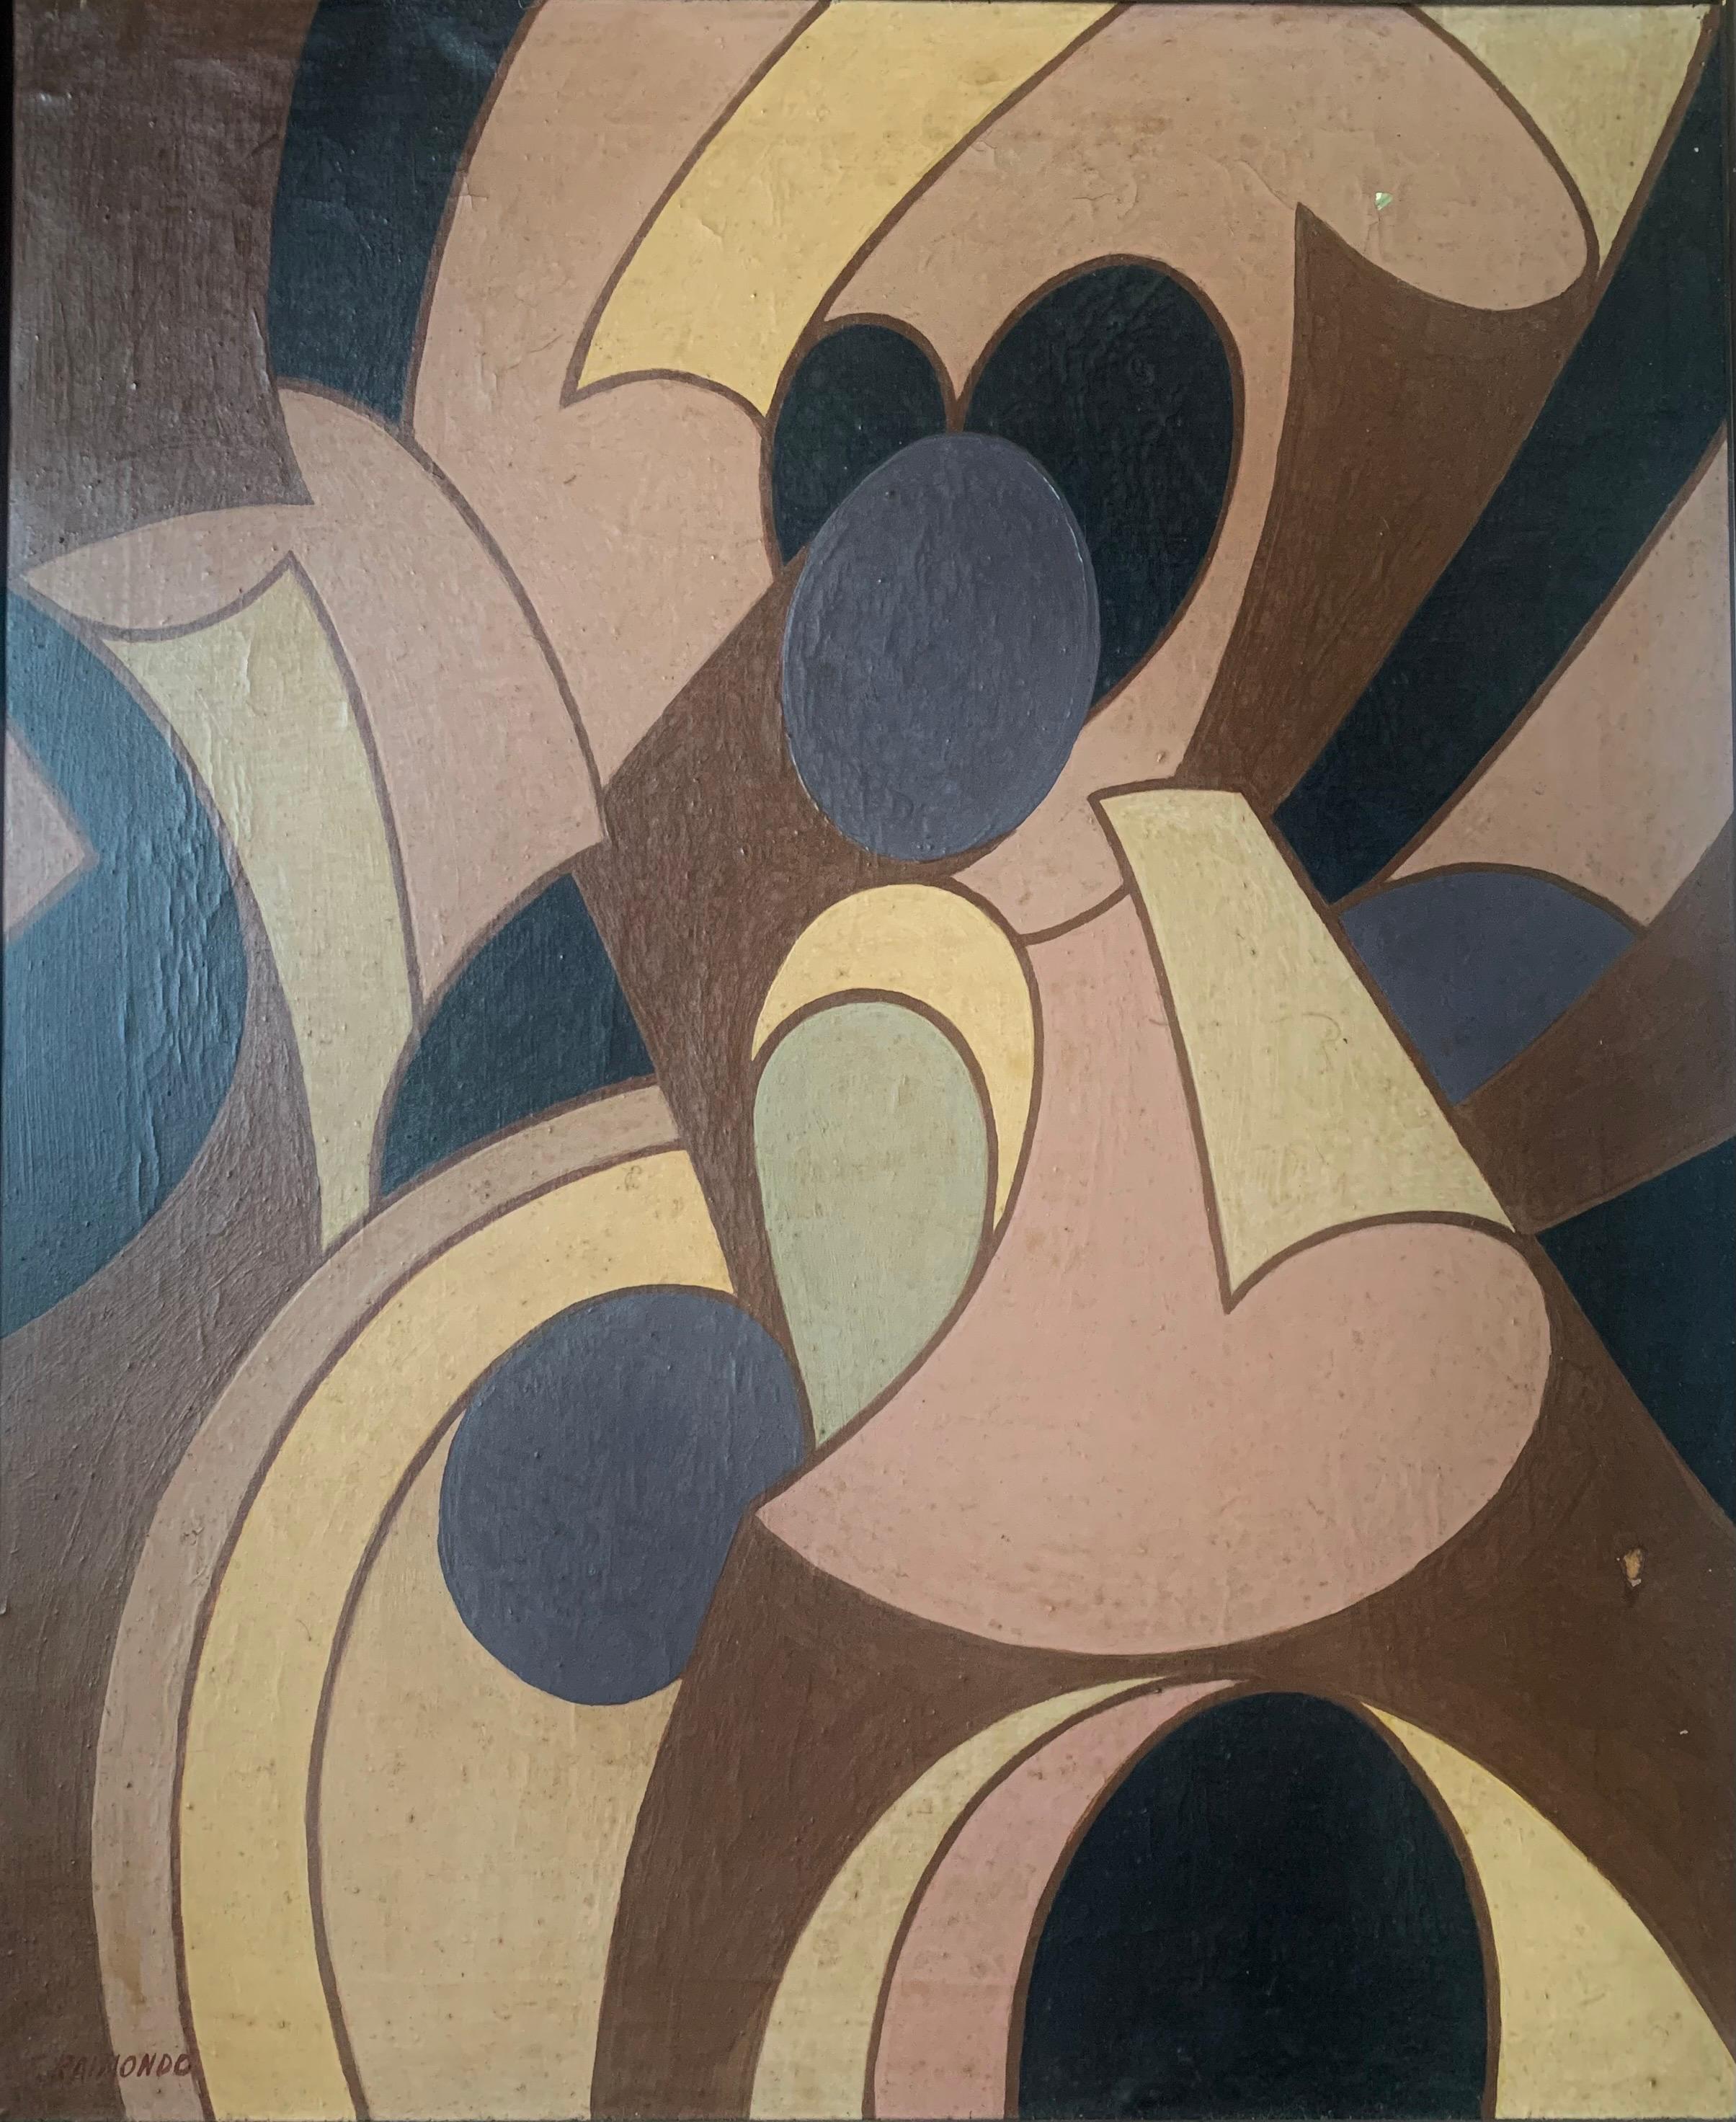 Unknown Still-Life Painting - Abstract Painting With Rolled painter's Canvases. 1970.  Signed F. Raimondo